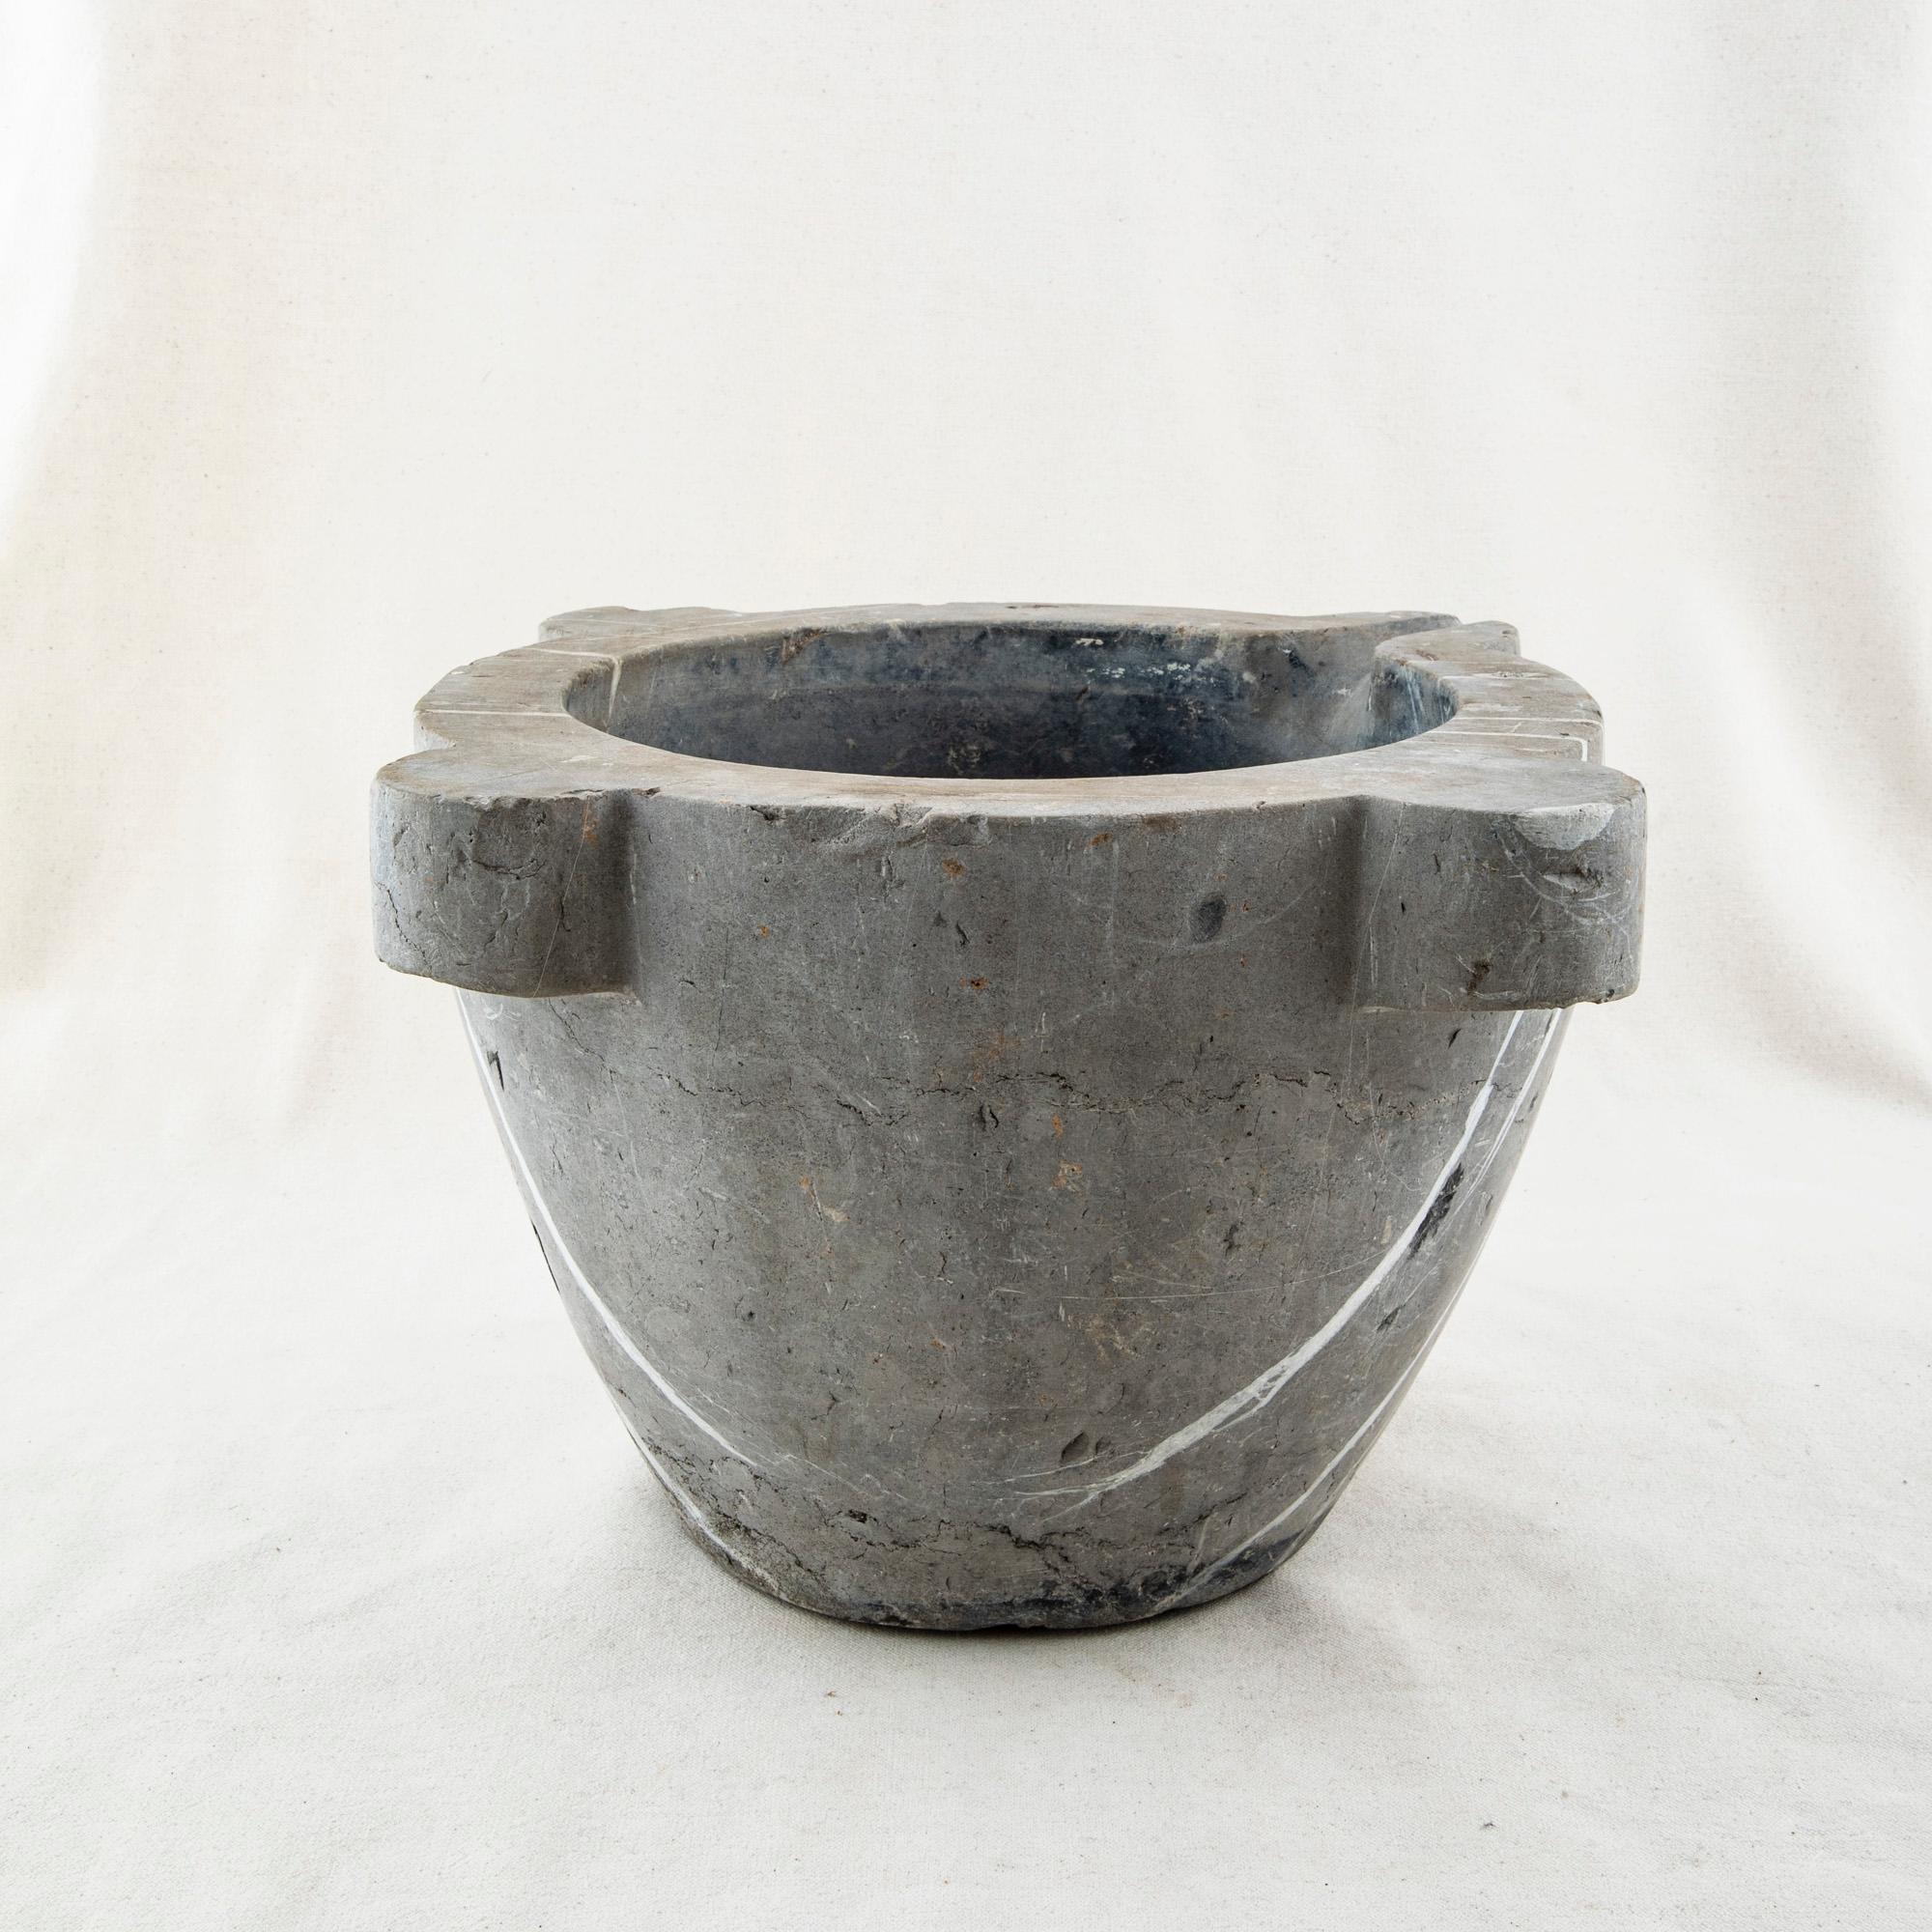 This exceptionally large late nineteenth century marble mortar is made from a single block of grey marble with white veining. Once used with its accompanying pestle by a pharmacist to grind herbs for medicinal purposes, it can now serve as a